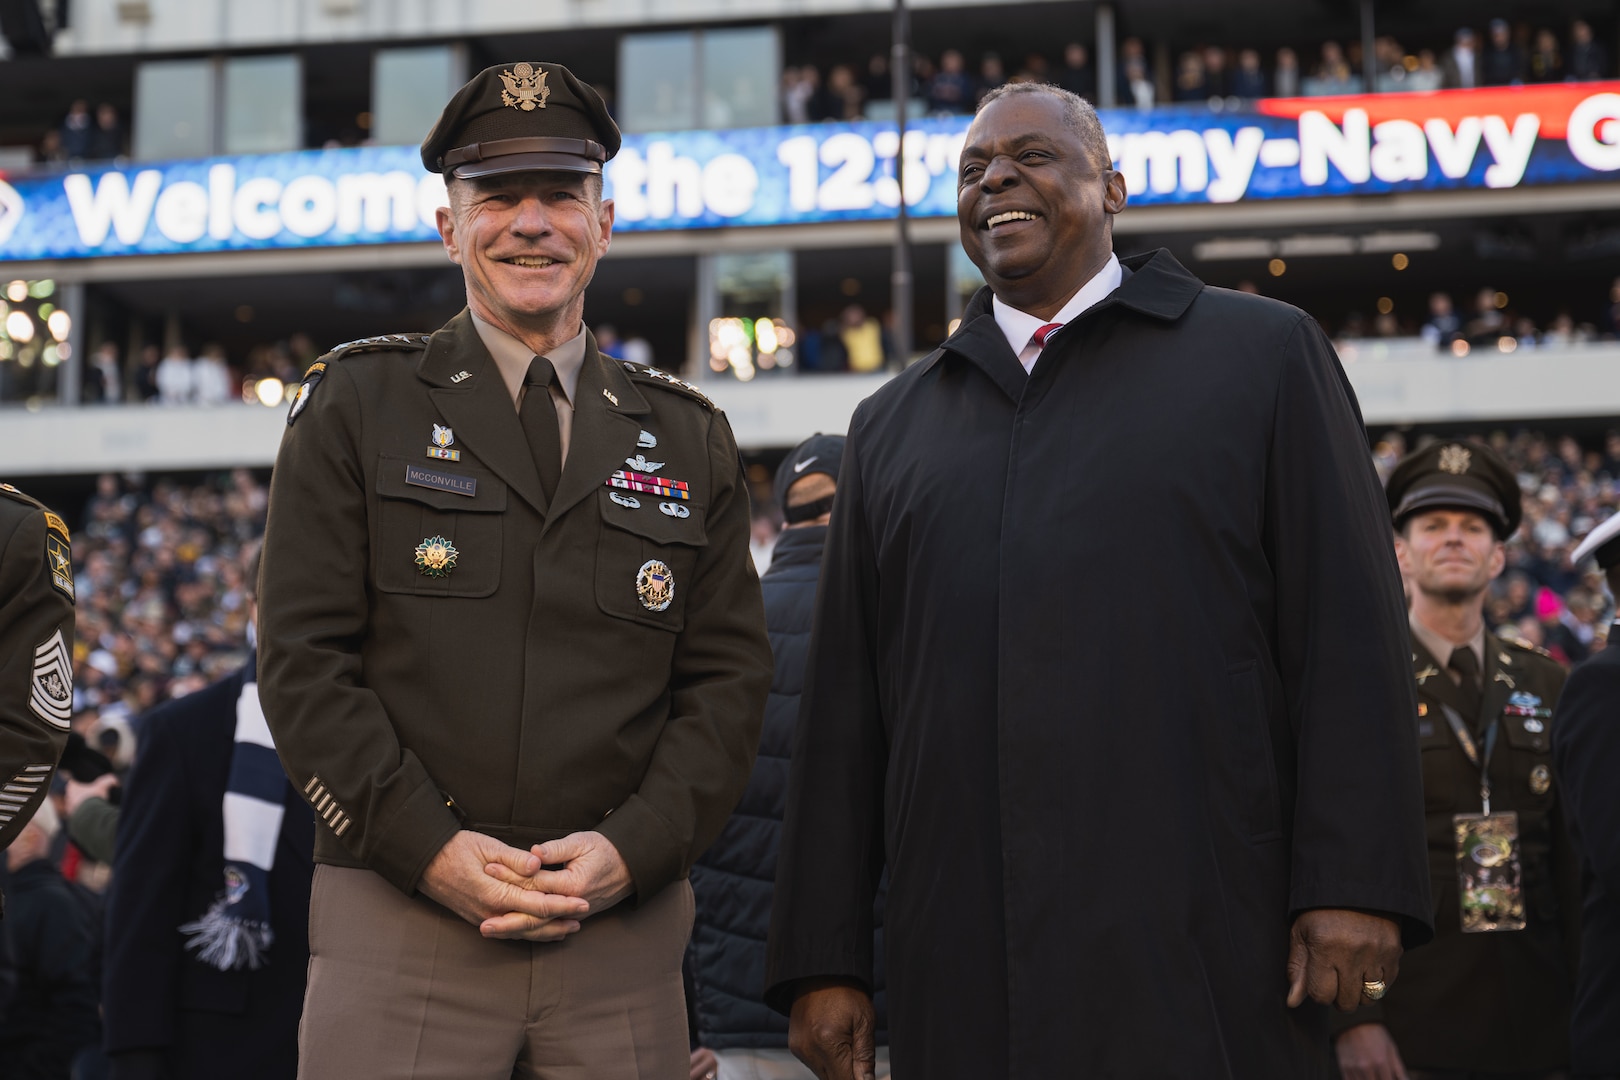 Two men, one dressed in civilian clothing and the other wearing a military uniform, smile broadly.